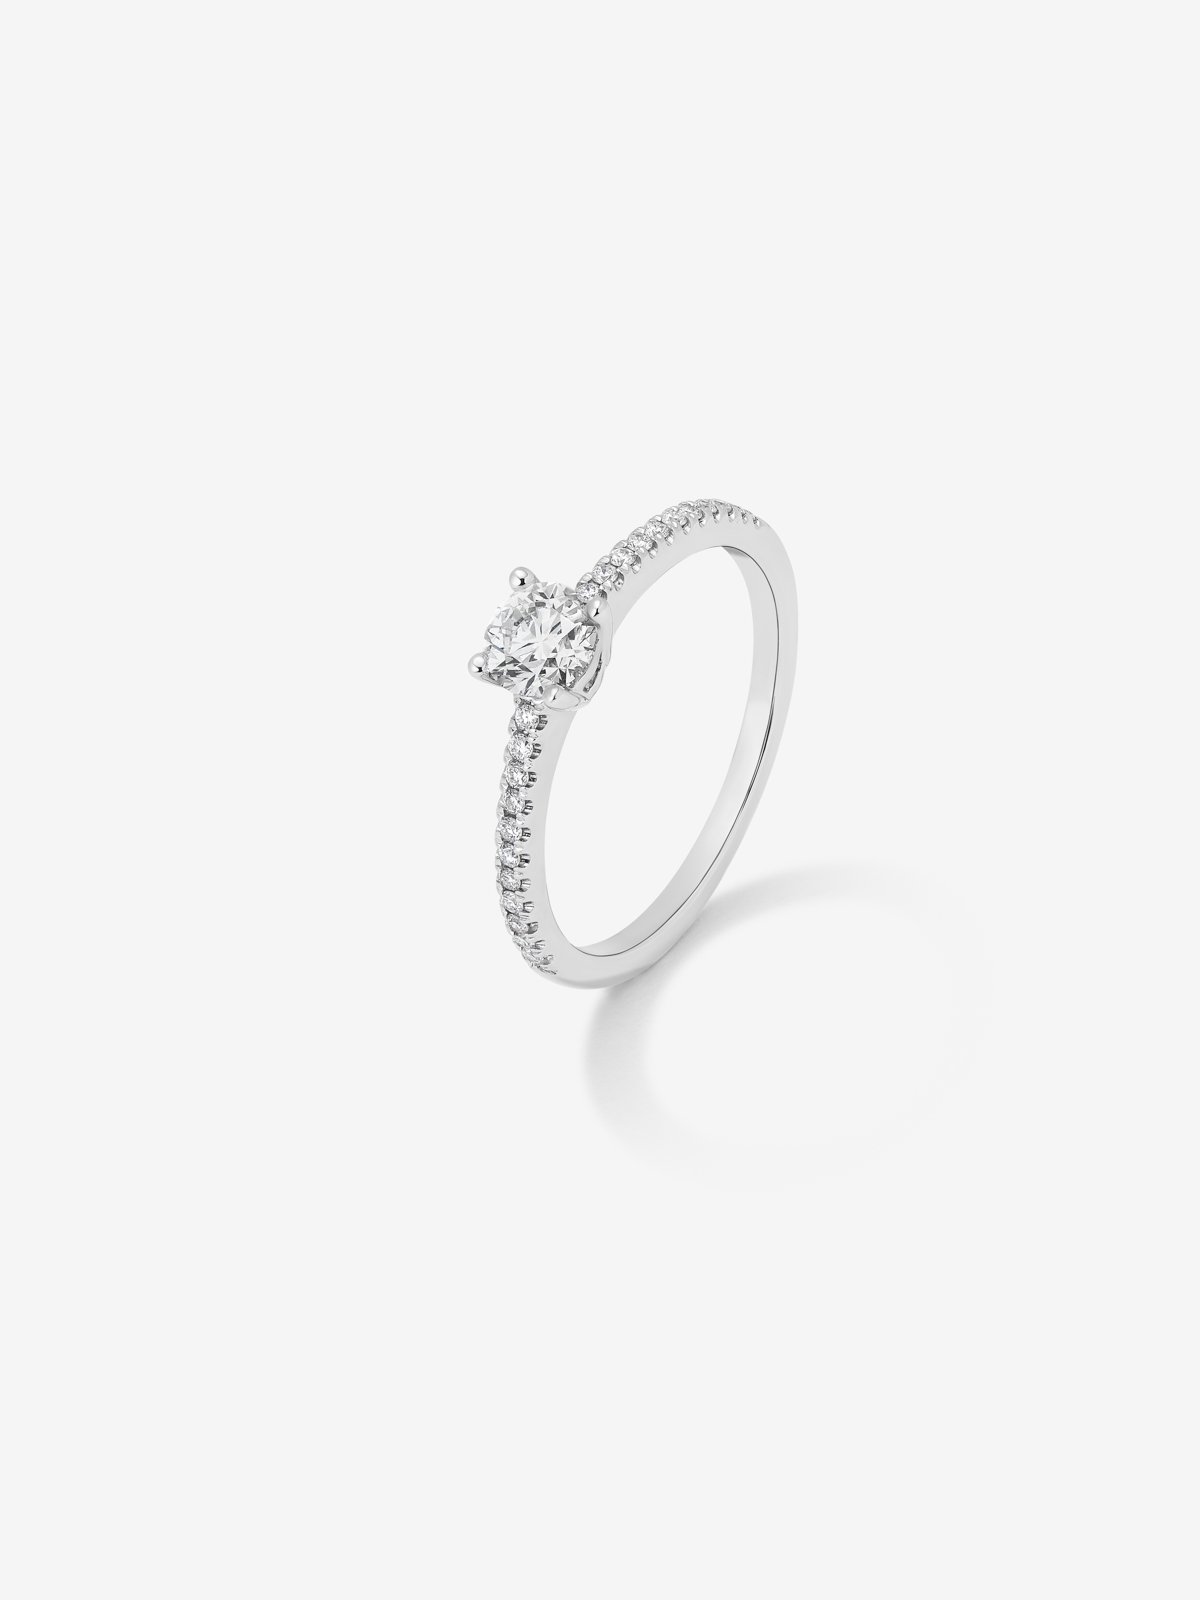 18K White Gold Commitment Ring with Diamonds